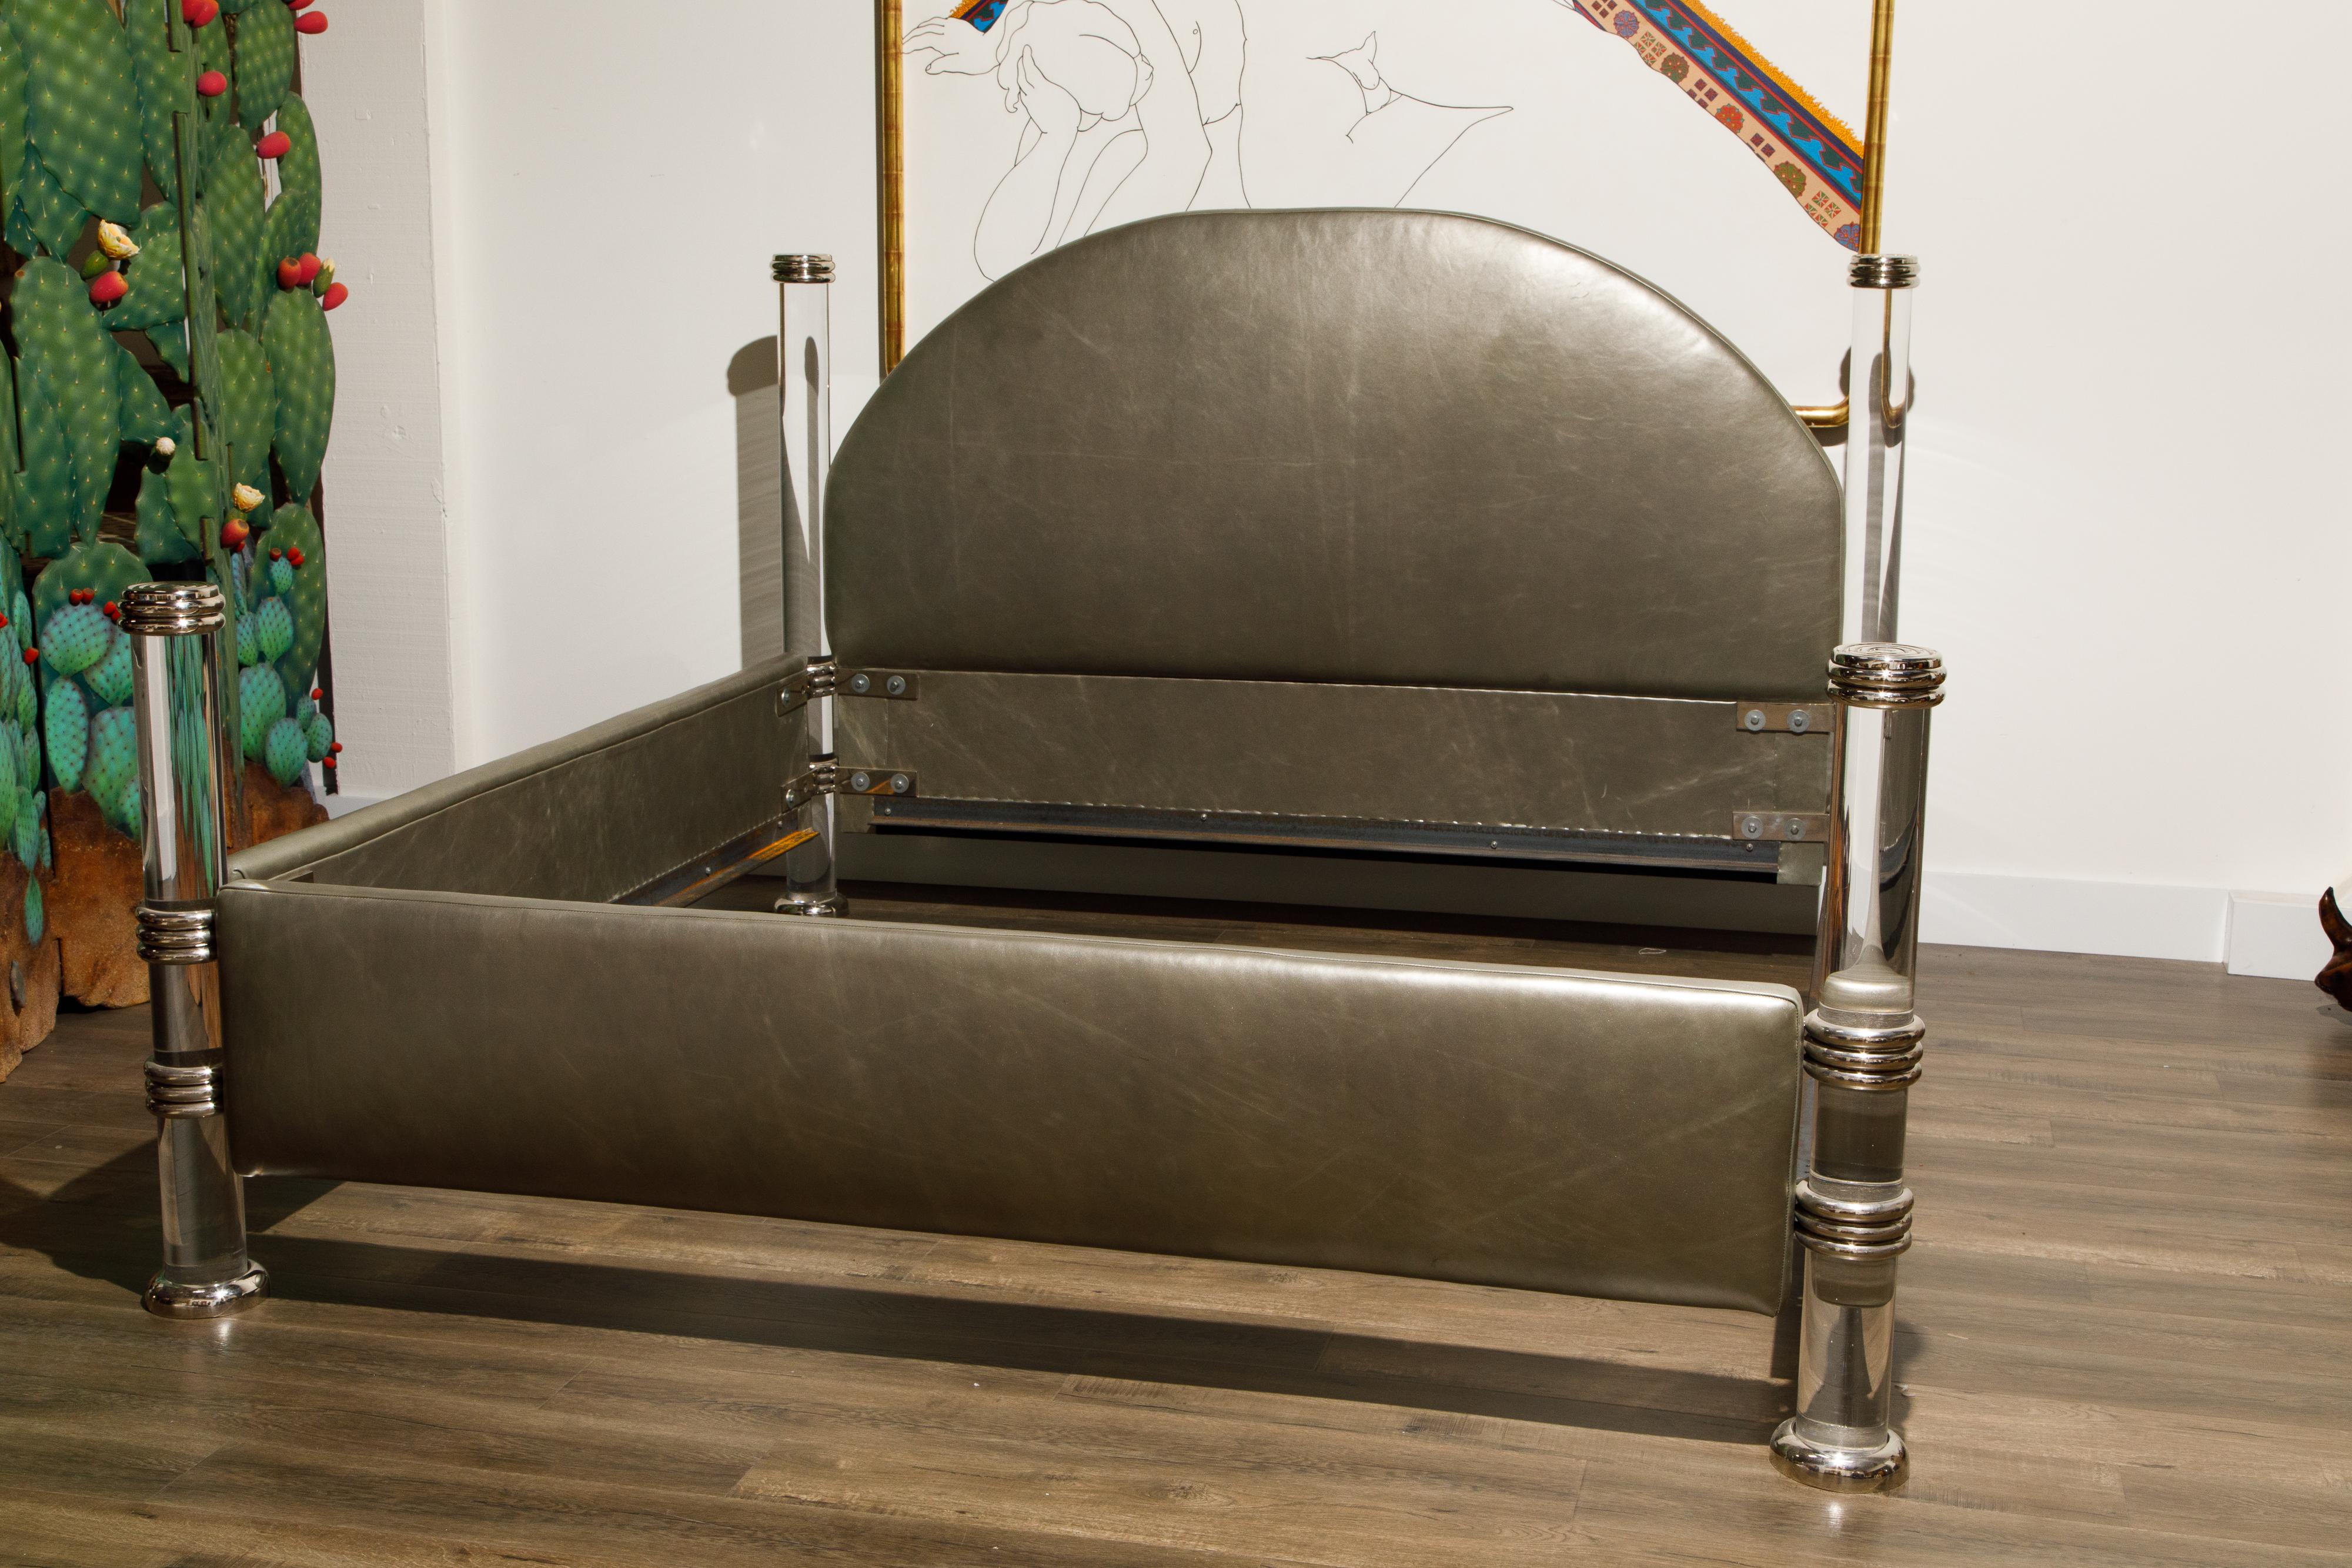 This beautiful king sized four-post bed by Marcello Mioni features gleaming lucite and hefty chromed steel posts and accents with sumptuous leather for the headboard, footboard and side rails. Also two matching leather bolster pillows are